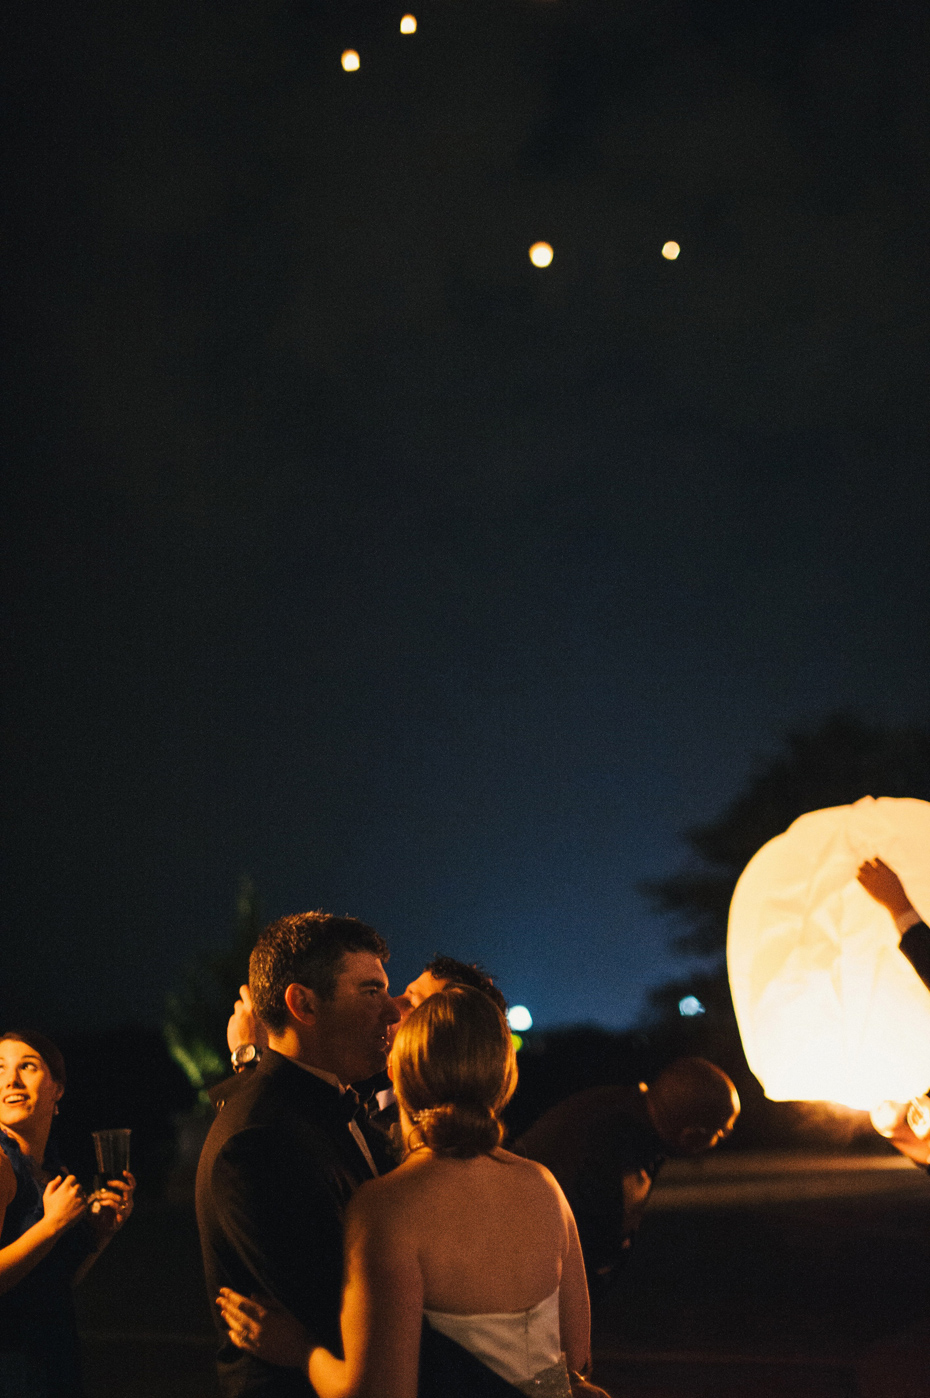 The bride and groom watch chinese lanterns in the sky at a wedding reception at The Fountainview Mansion in Auburn Alabama, photographed by Ann Arbor Wedding Photographer Heather Jowett.